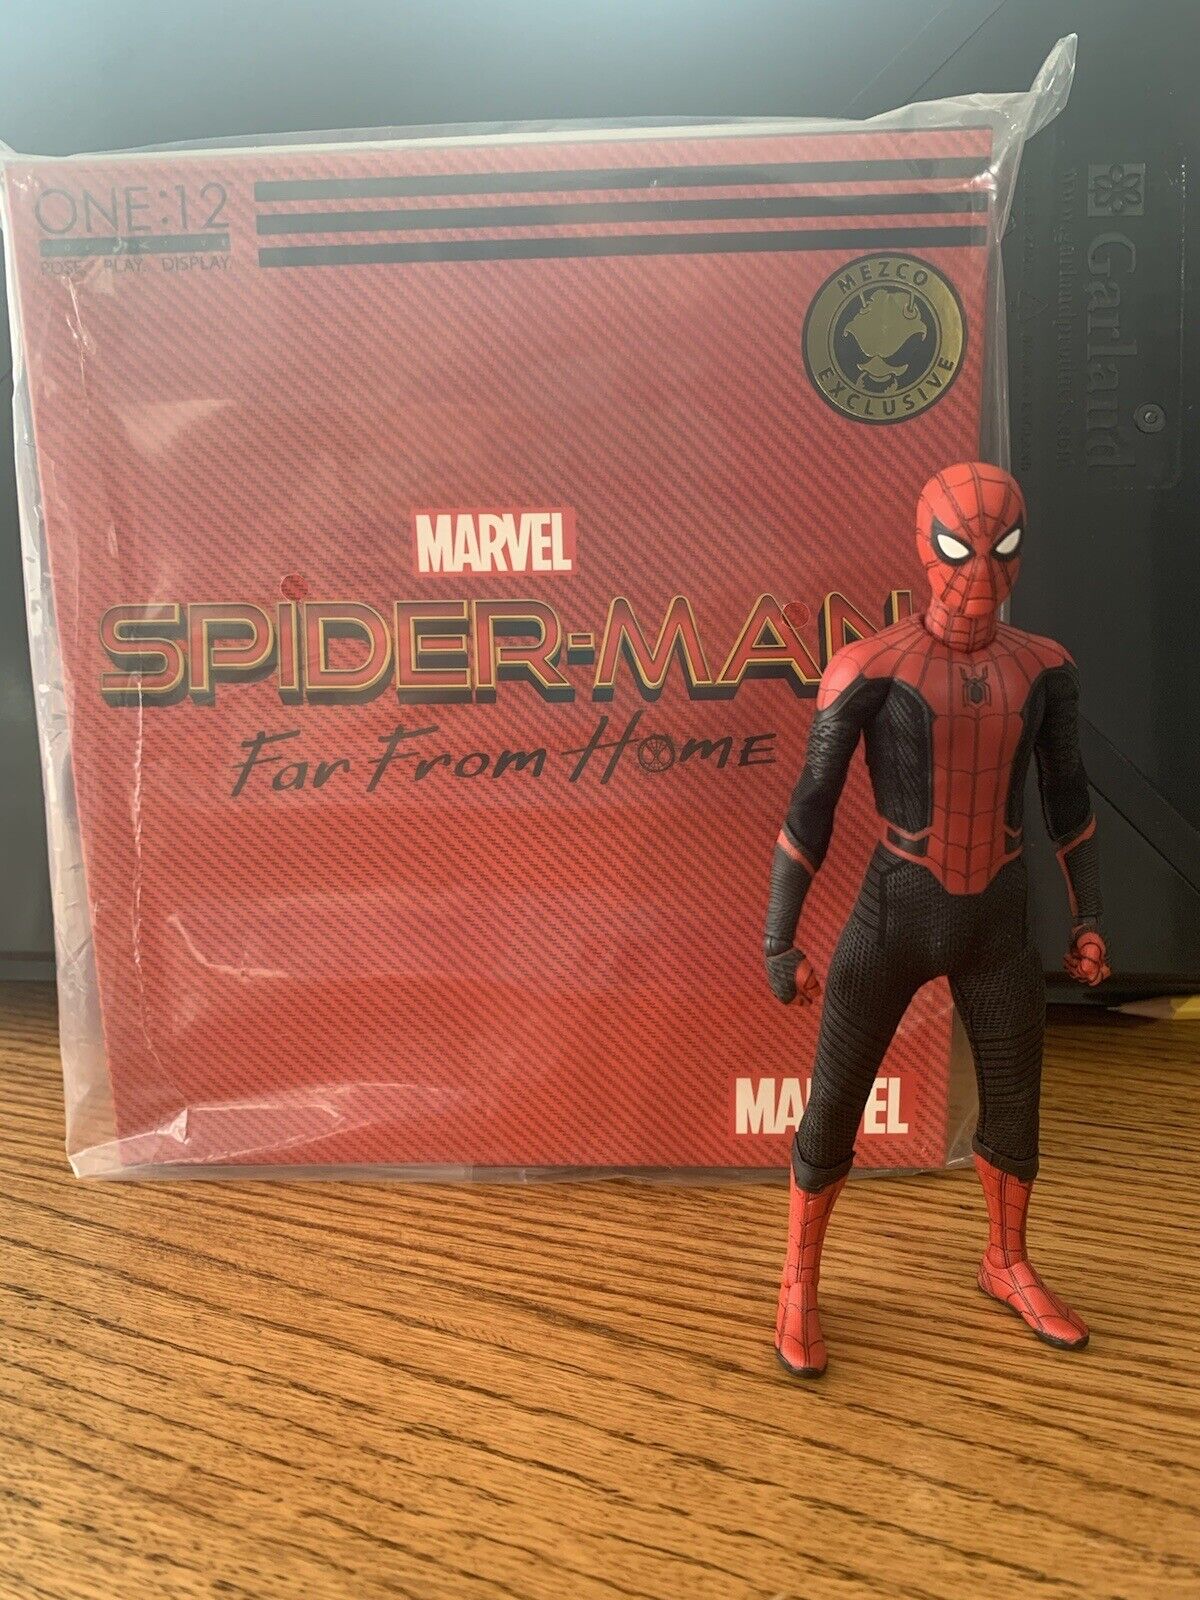 Displayed Mezco One:12 Spiderman Far From Home